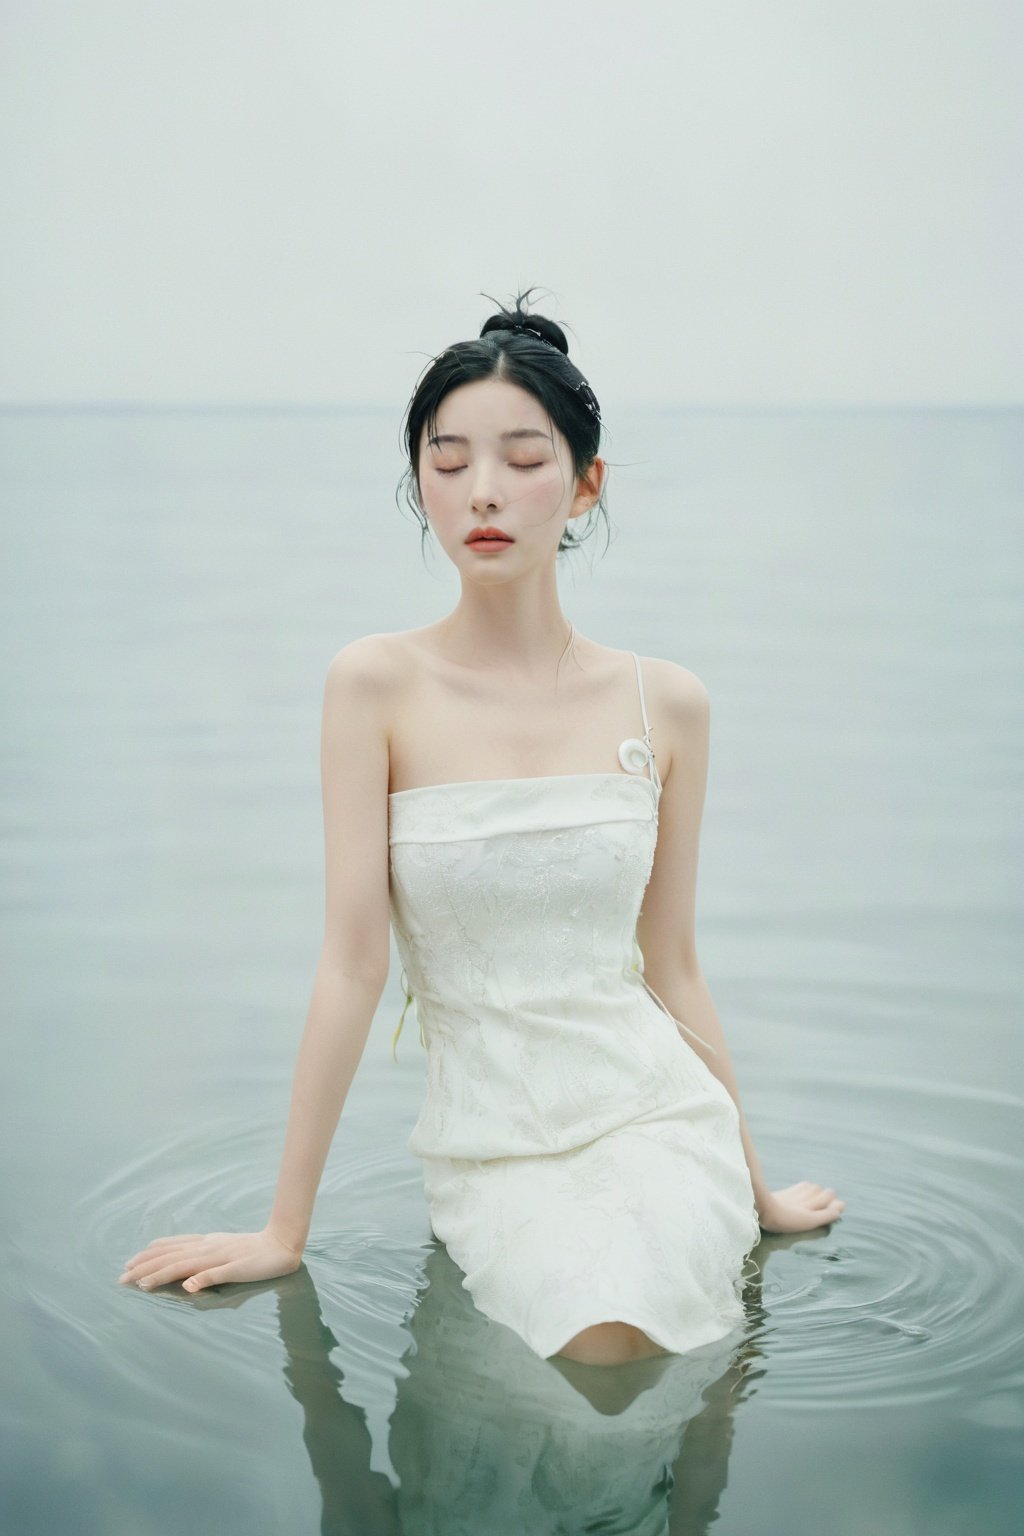  analog film photo A black-haired girl, wearing a white dress, with a single hair bun adorned with a hairpin, her eyes closed, standing alone on the water surface, reflecting her image. She is a fair-skinned female, revealing her collarbone and bare shoulders as she faces the viewer, against a light gray background in a minimalist style. . faded film, desaturated, 35mm photo, grainy, vignette, vintage, Kodachrome, Lomography, stained, highly detailed, found footage, realistic,monkren